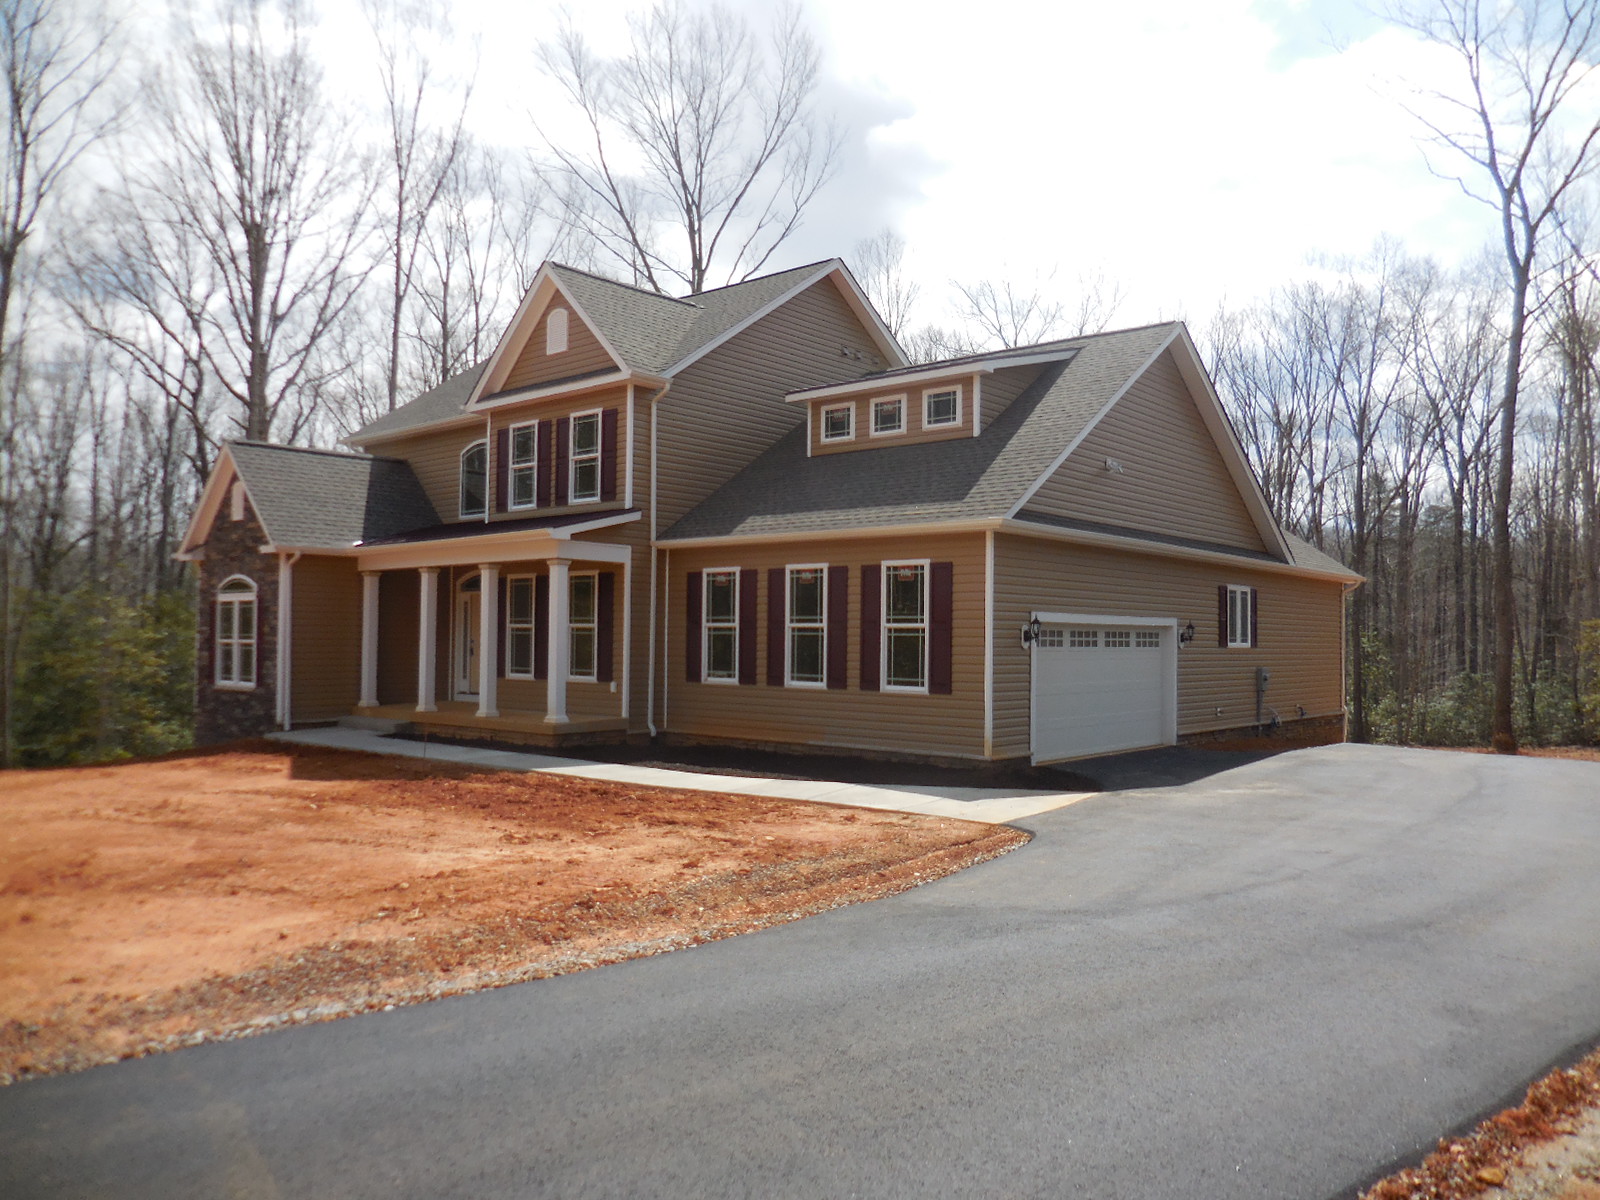 New Home on 2 Acres, River Road, Private: For Sale, Almost Complete!